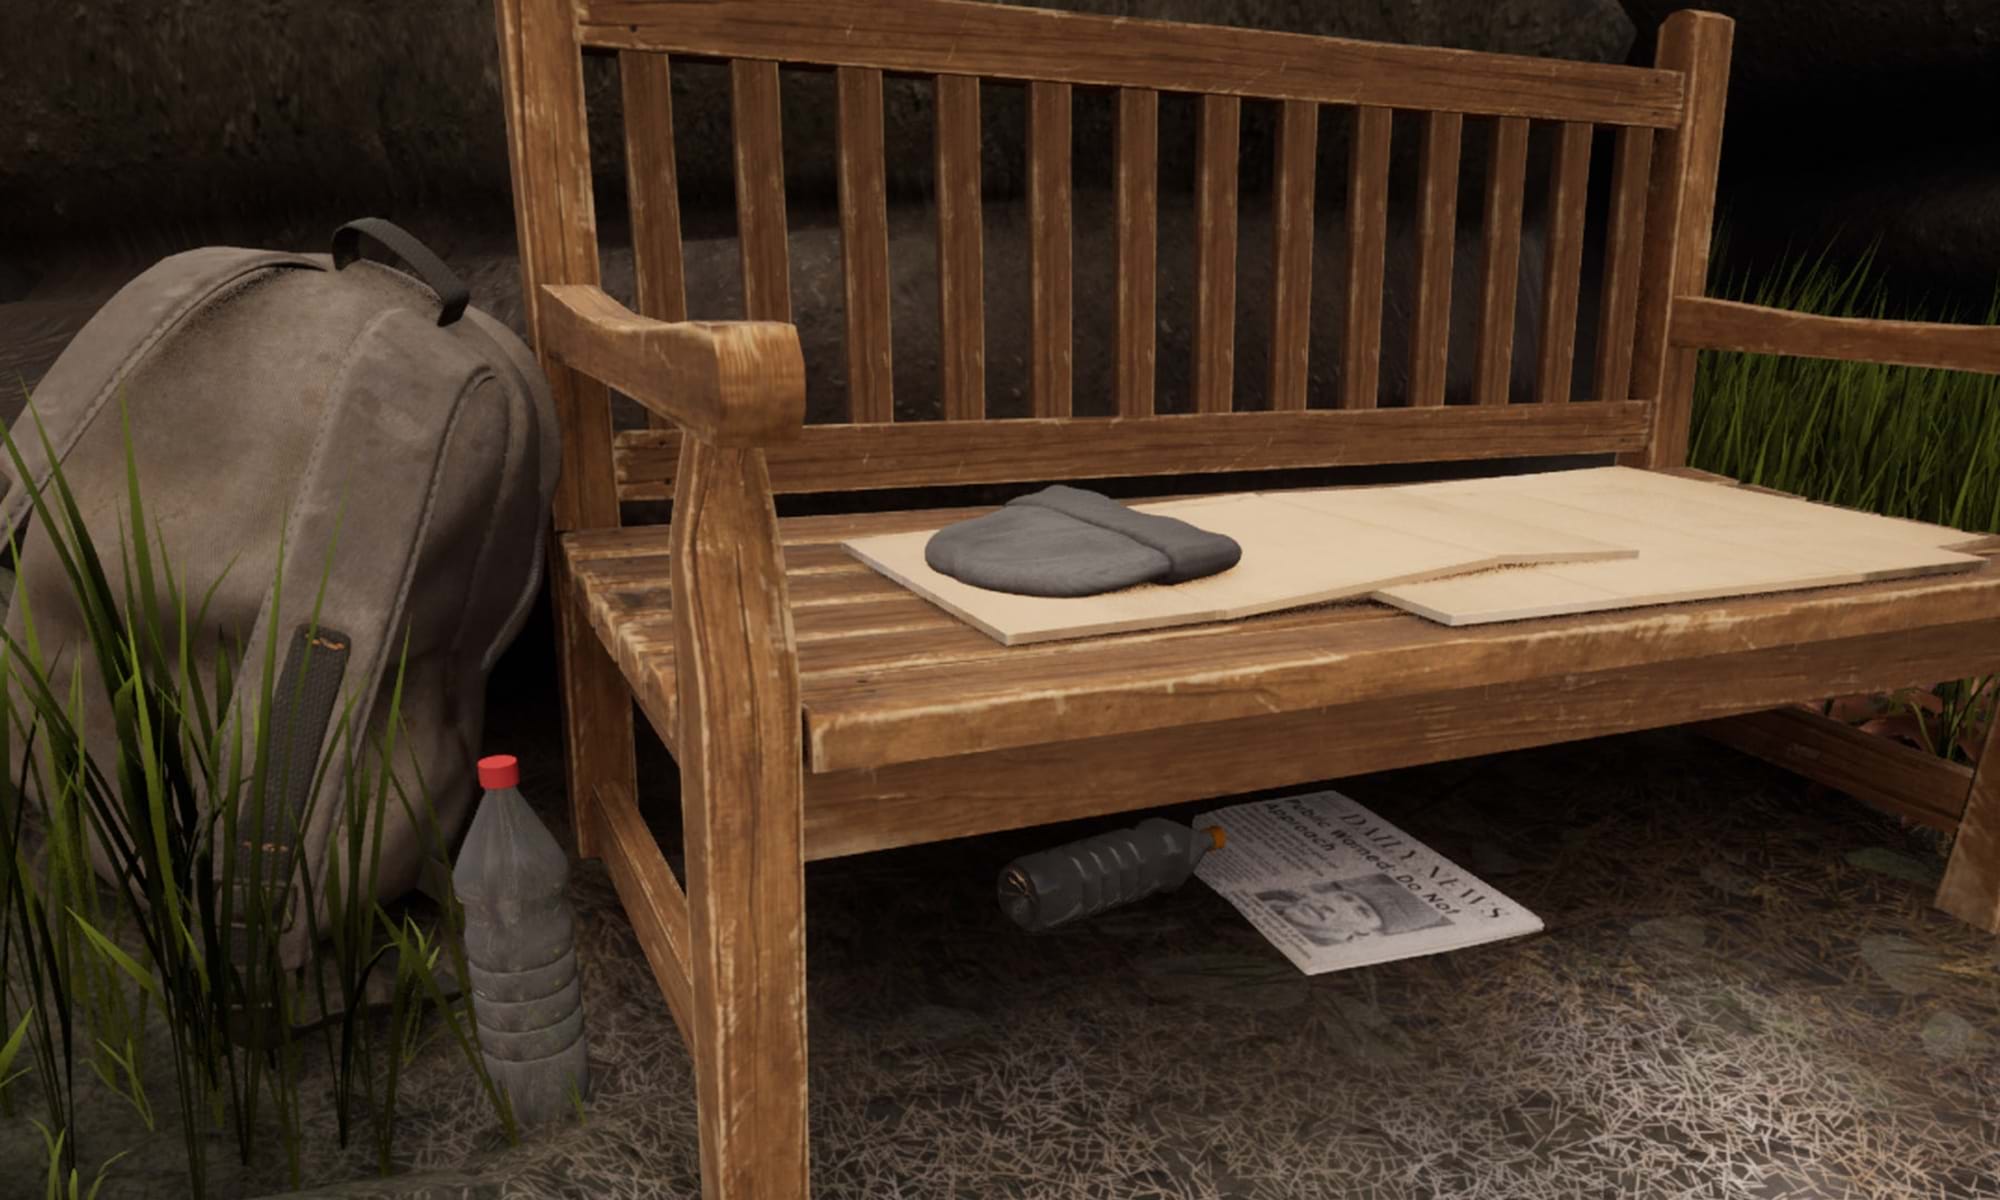 "Absent Characters in Environmental Storytelling" is a 2022 Digital Graduate Show project by Gaynor Larrigan, a Computer Arts student at Abertay University. 